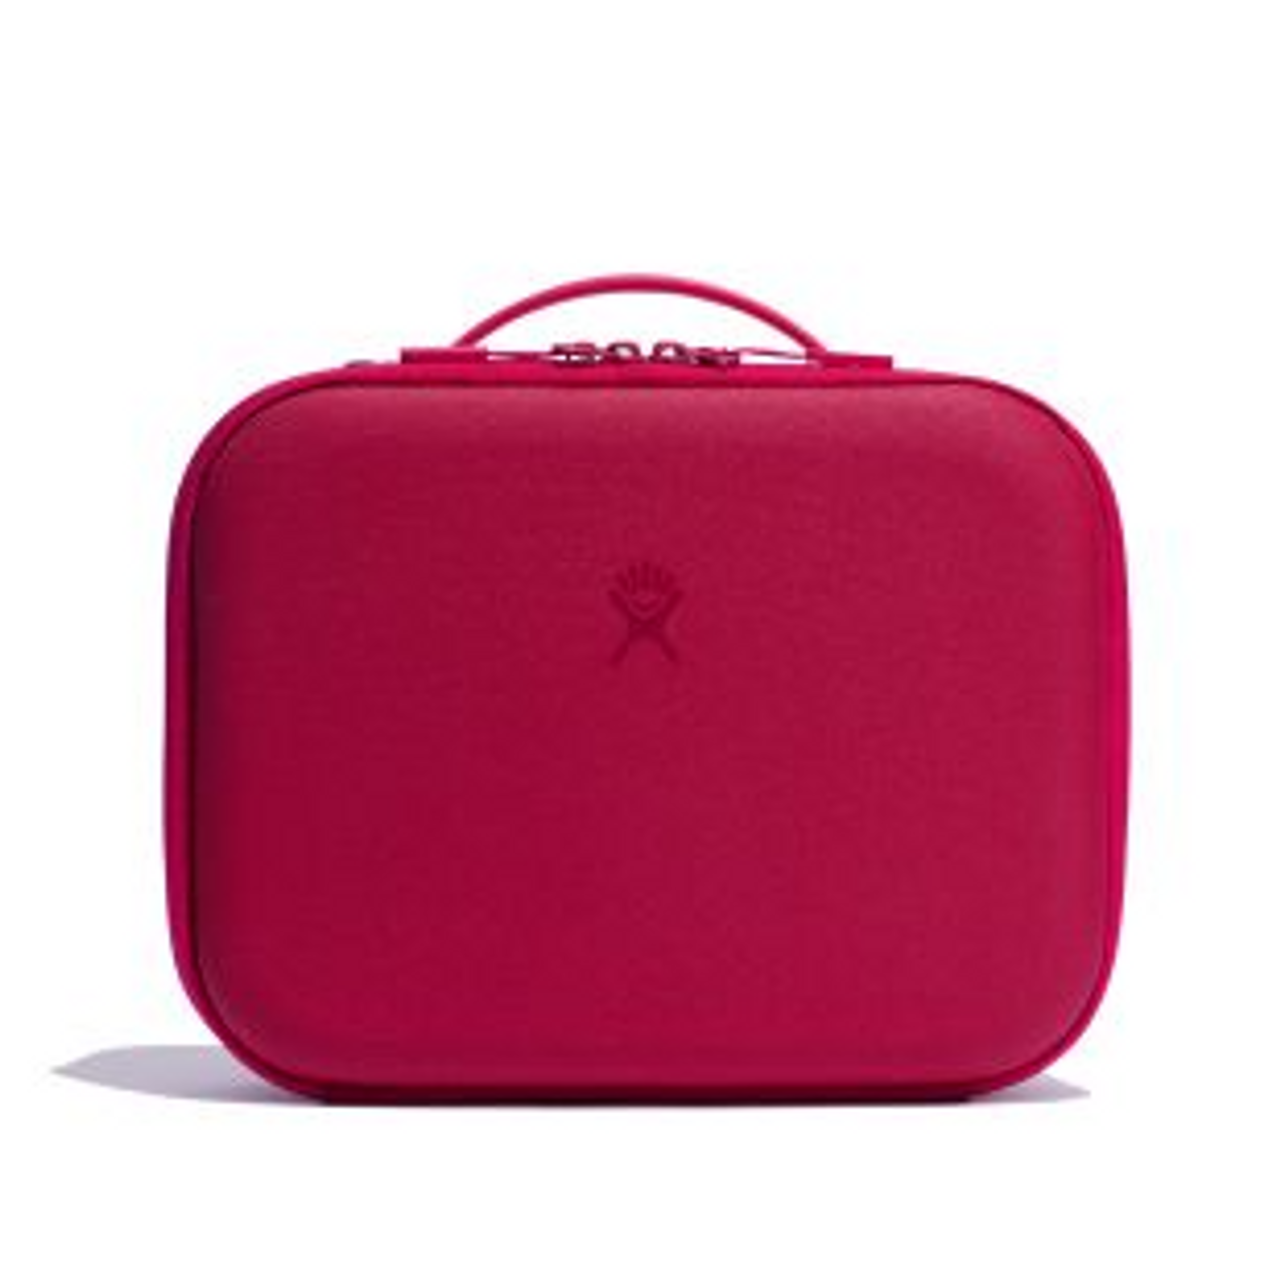 Hydro Flask Insulated Lunch Box - Large Snapper